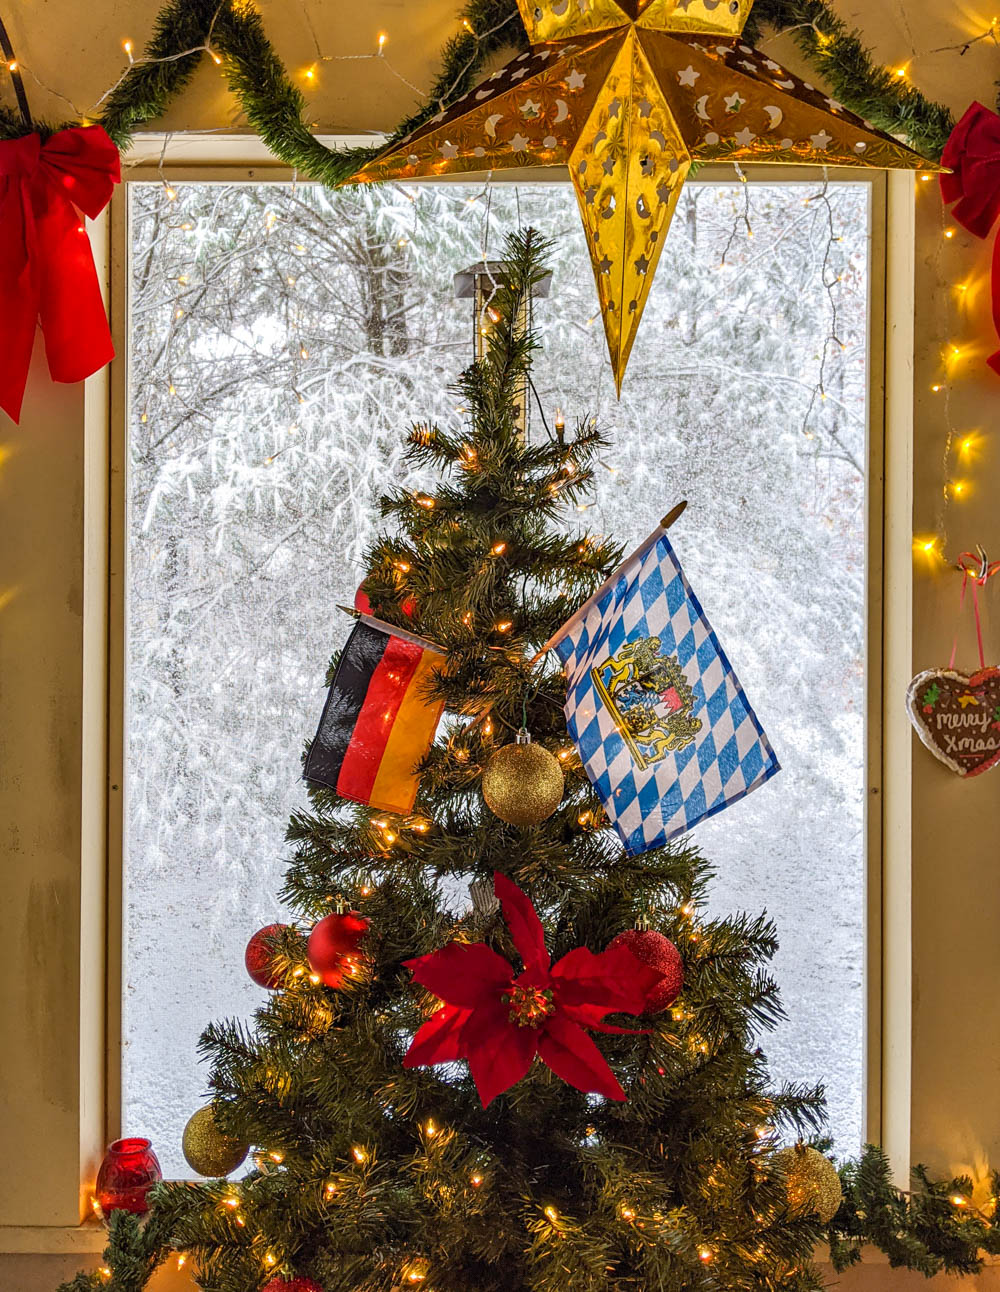 Christmas tree decorated with German flags surrounded by snow and stars